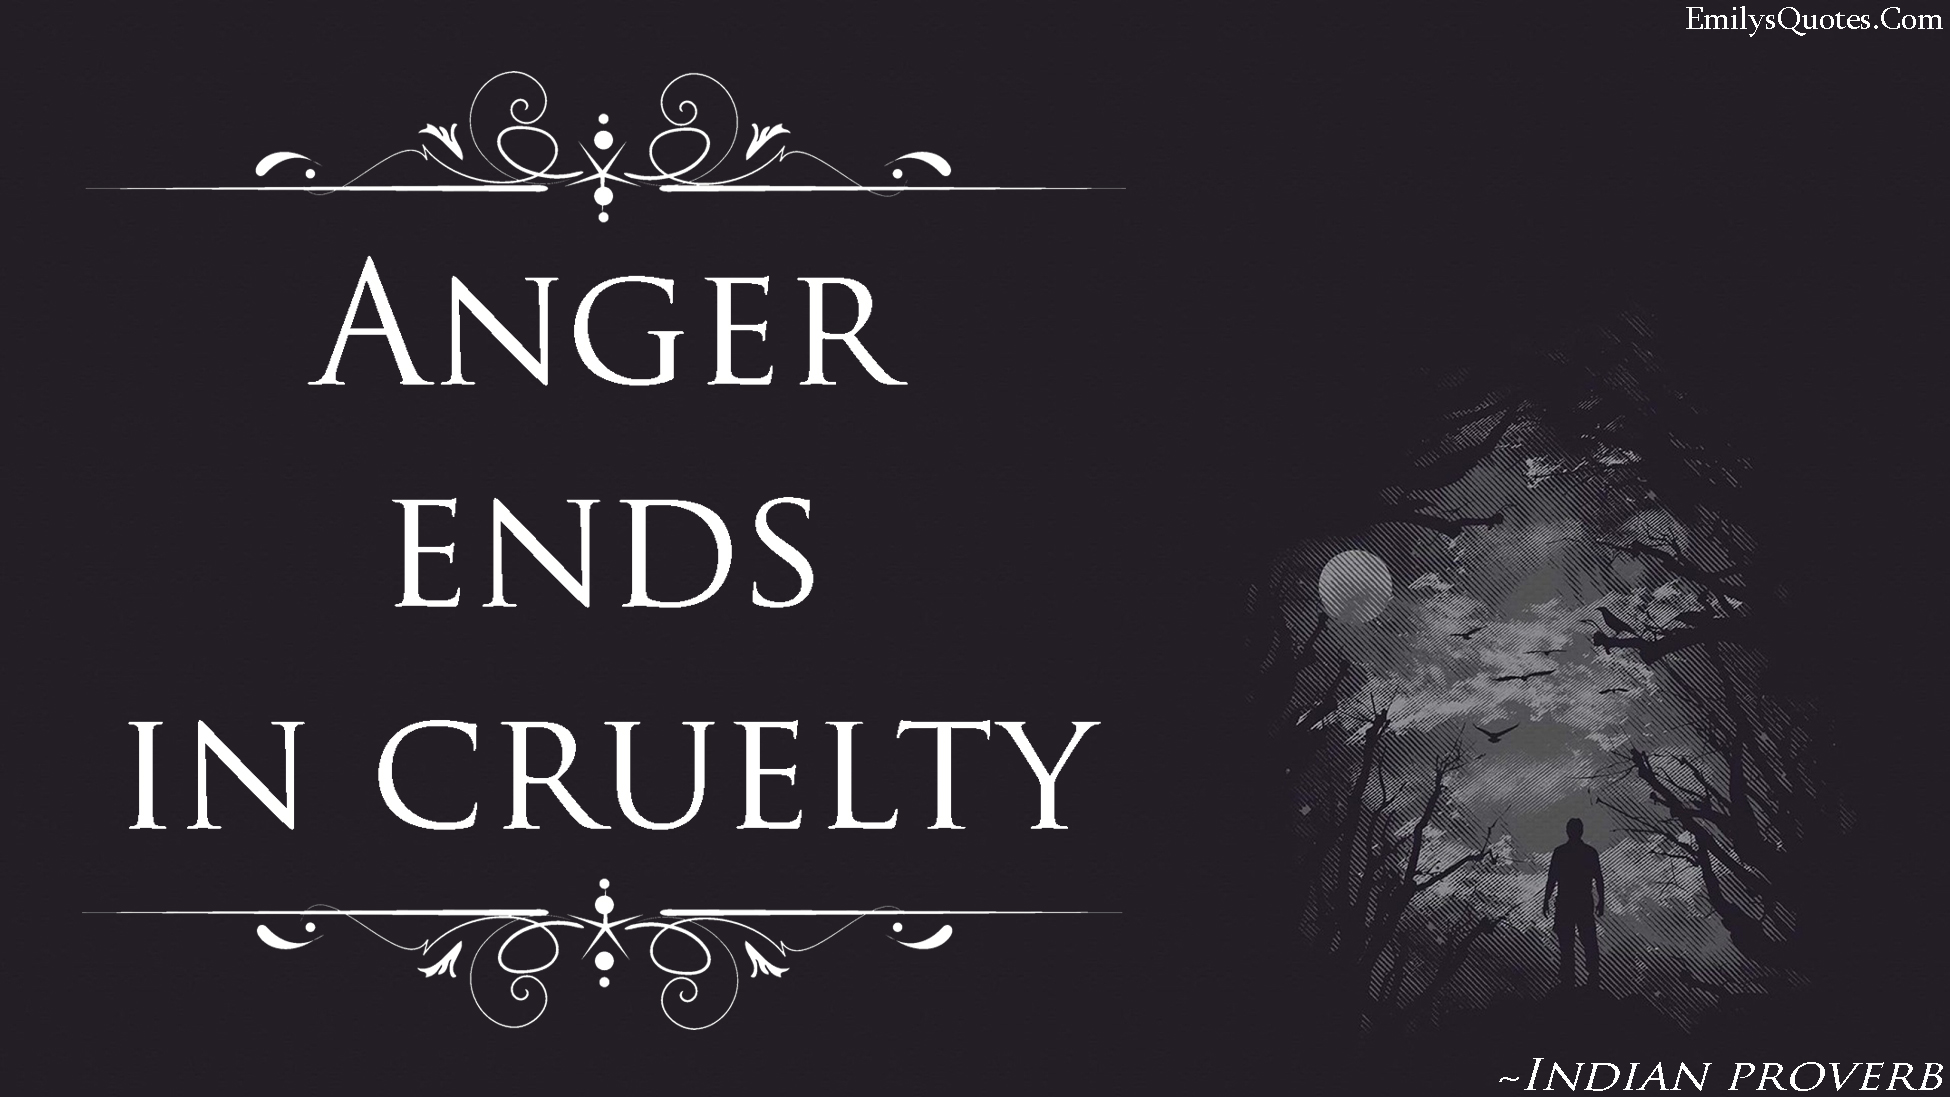 Anger ends in cruelty